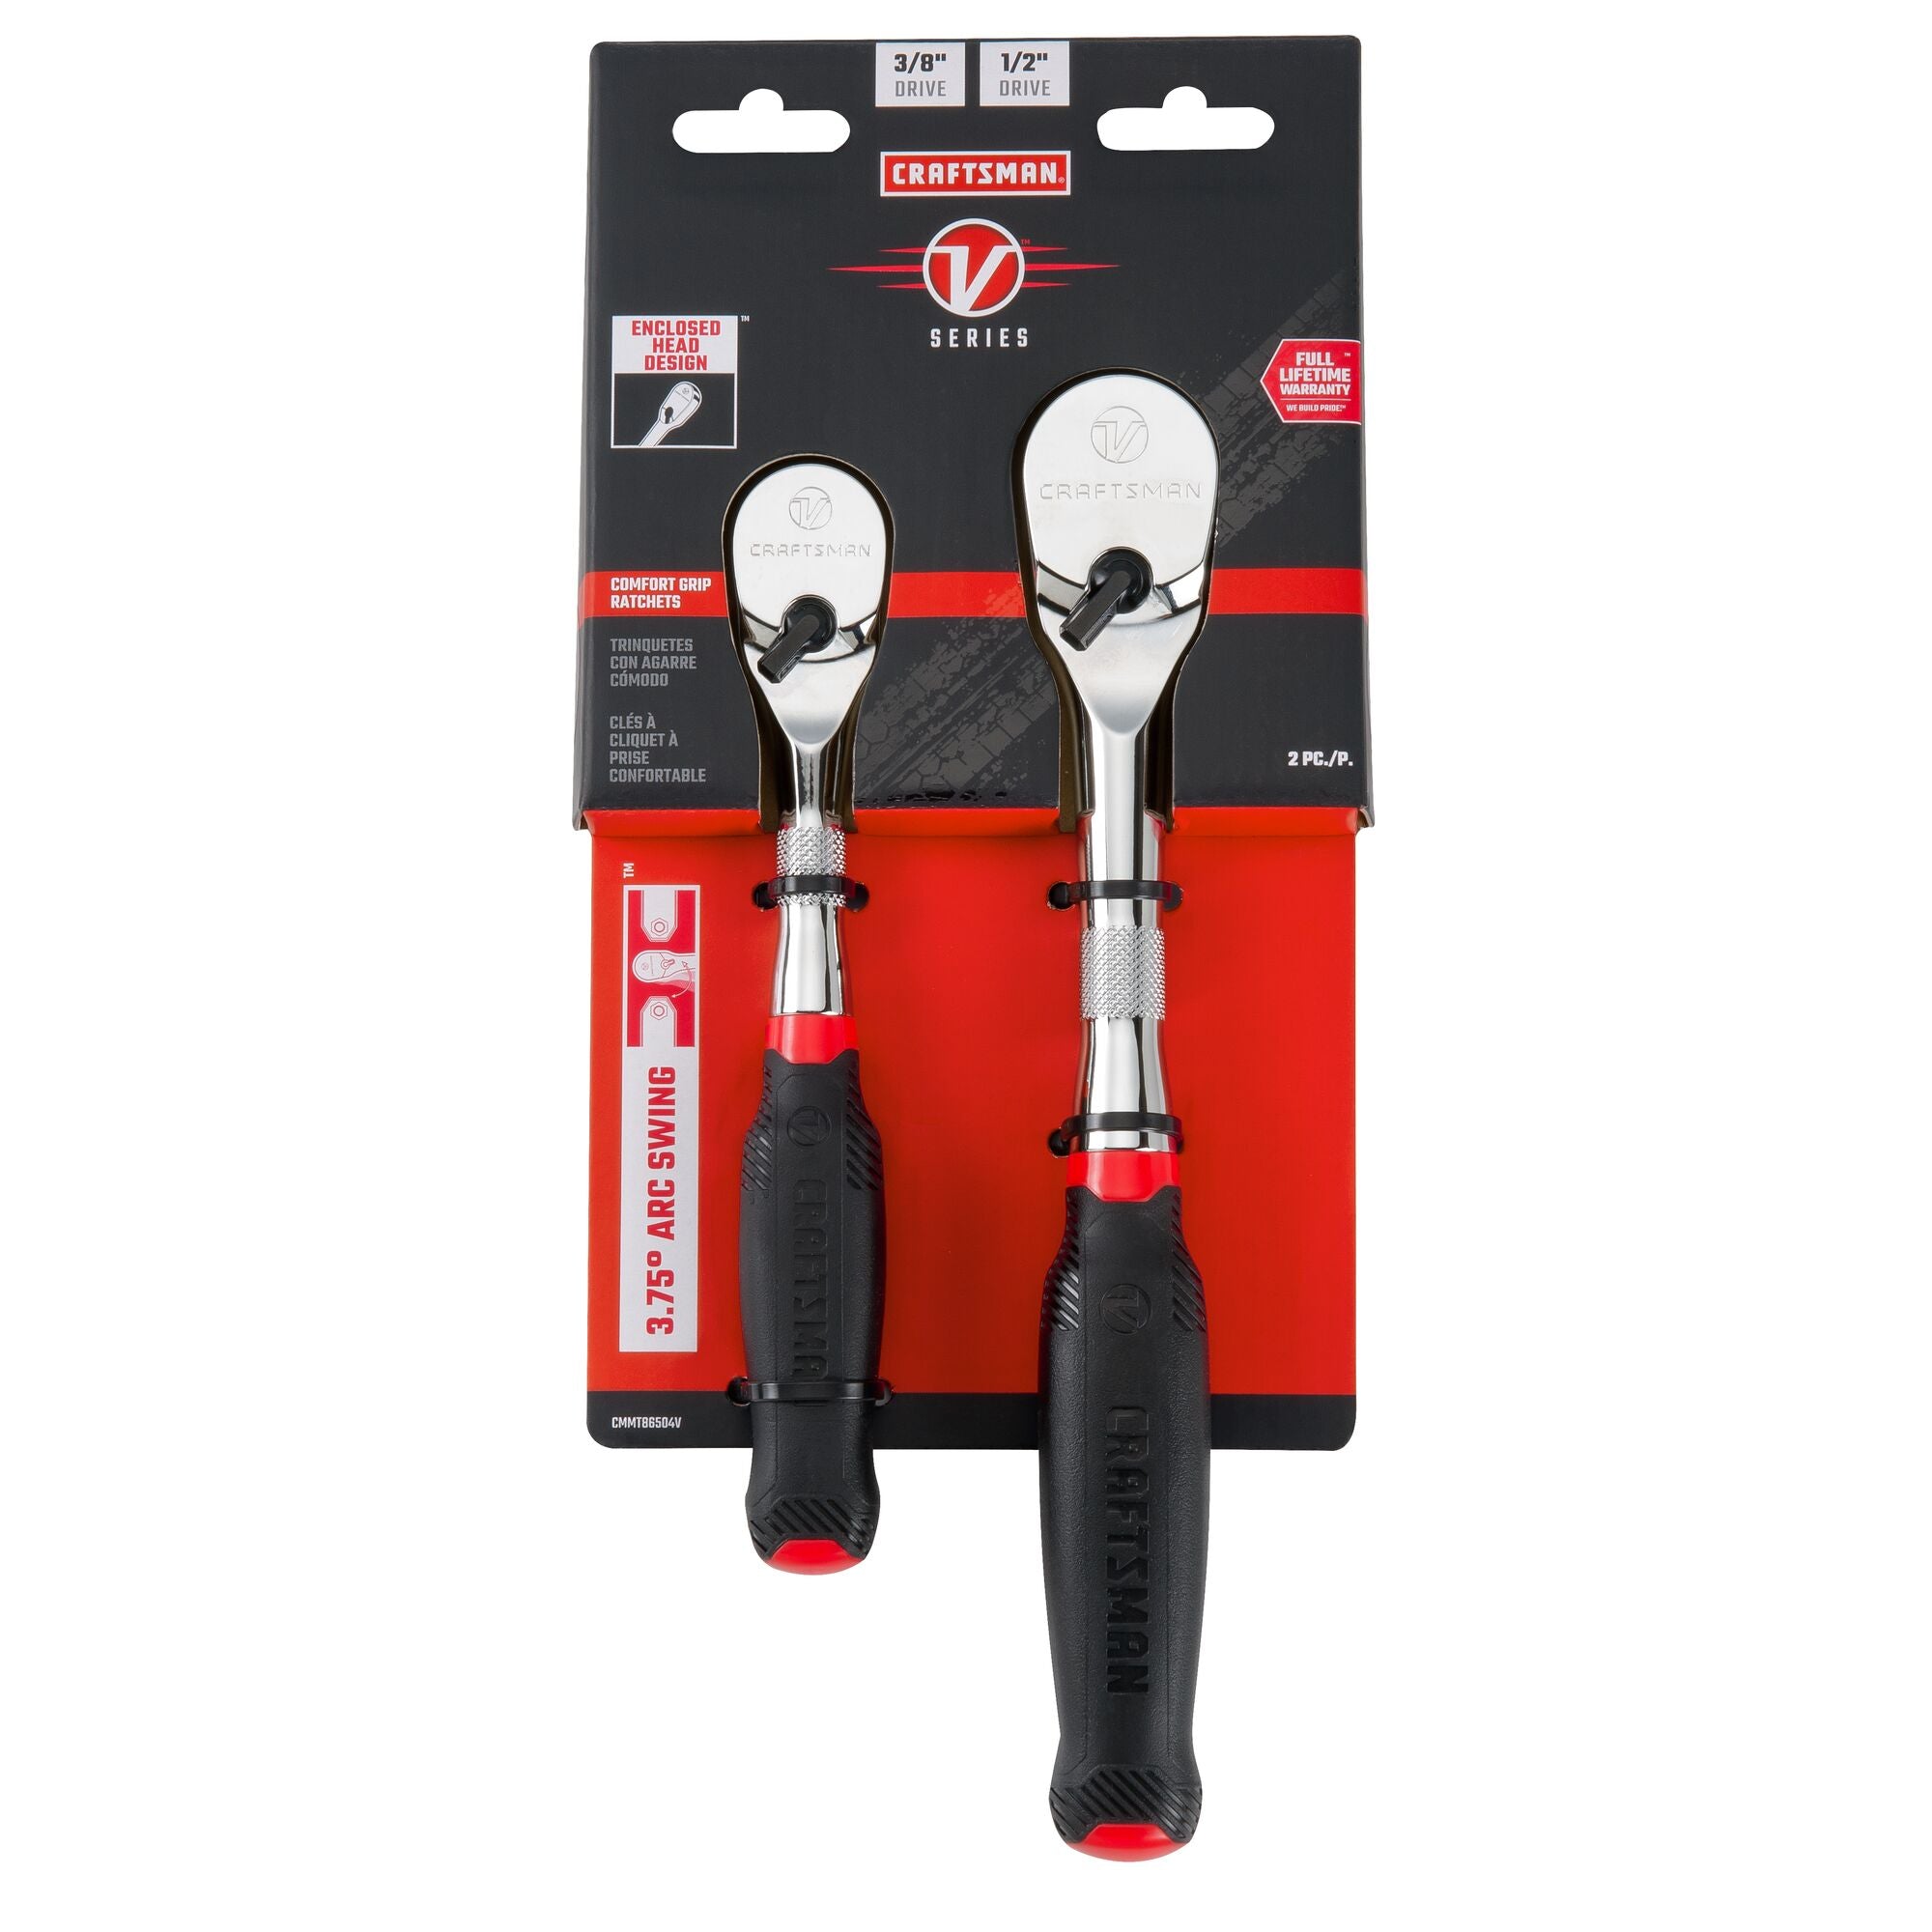 V series three eighth inch and half inch drive comfort grip ratchet in packaging. 2 pack